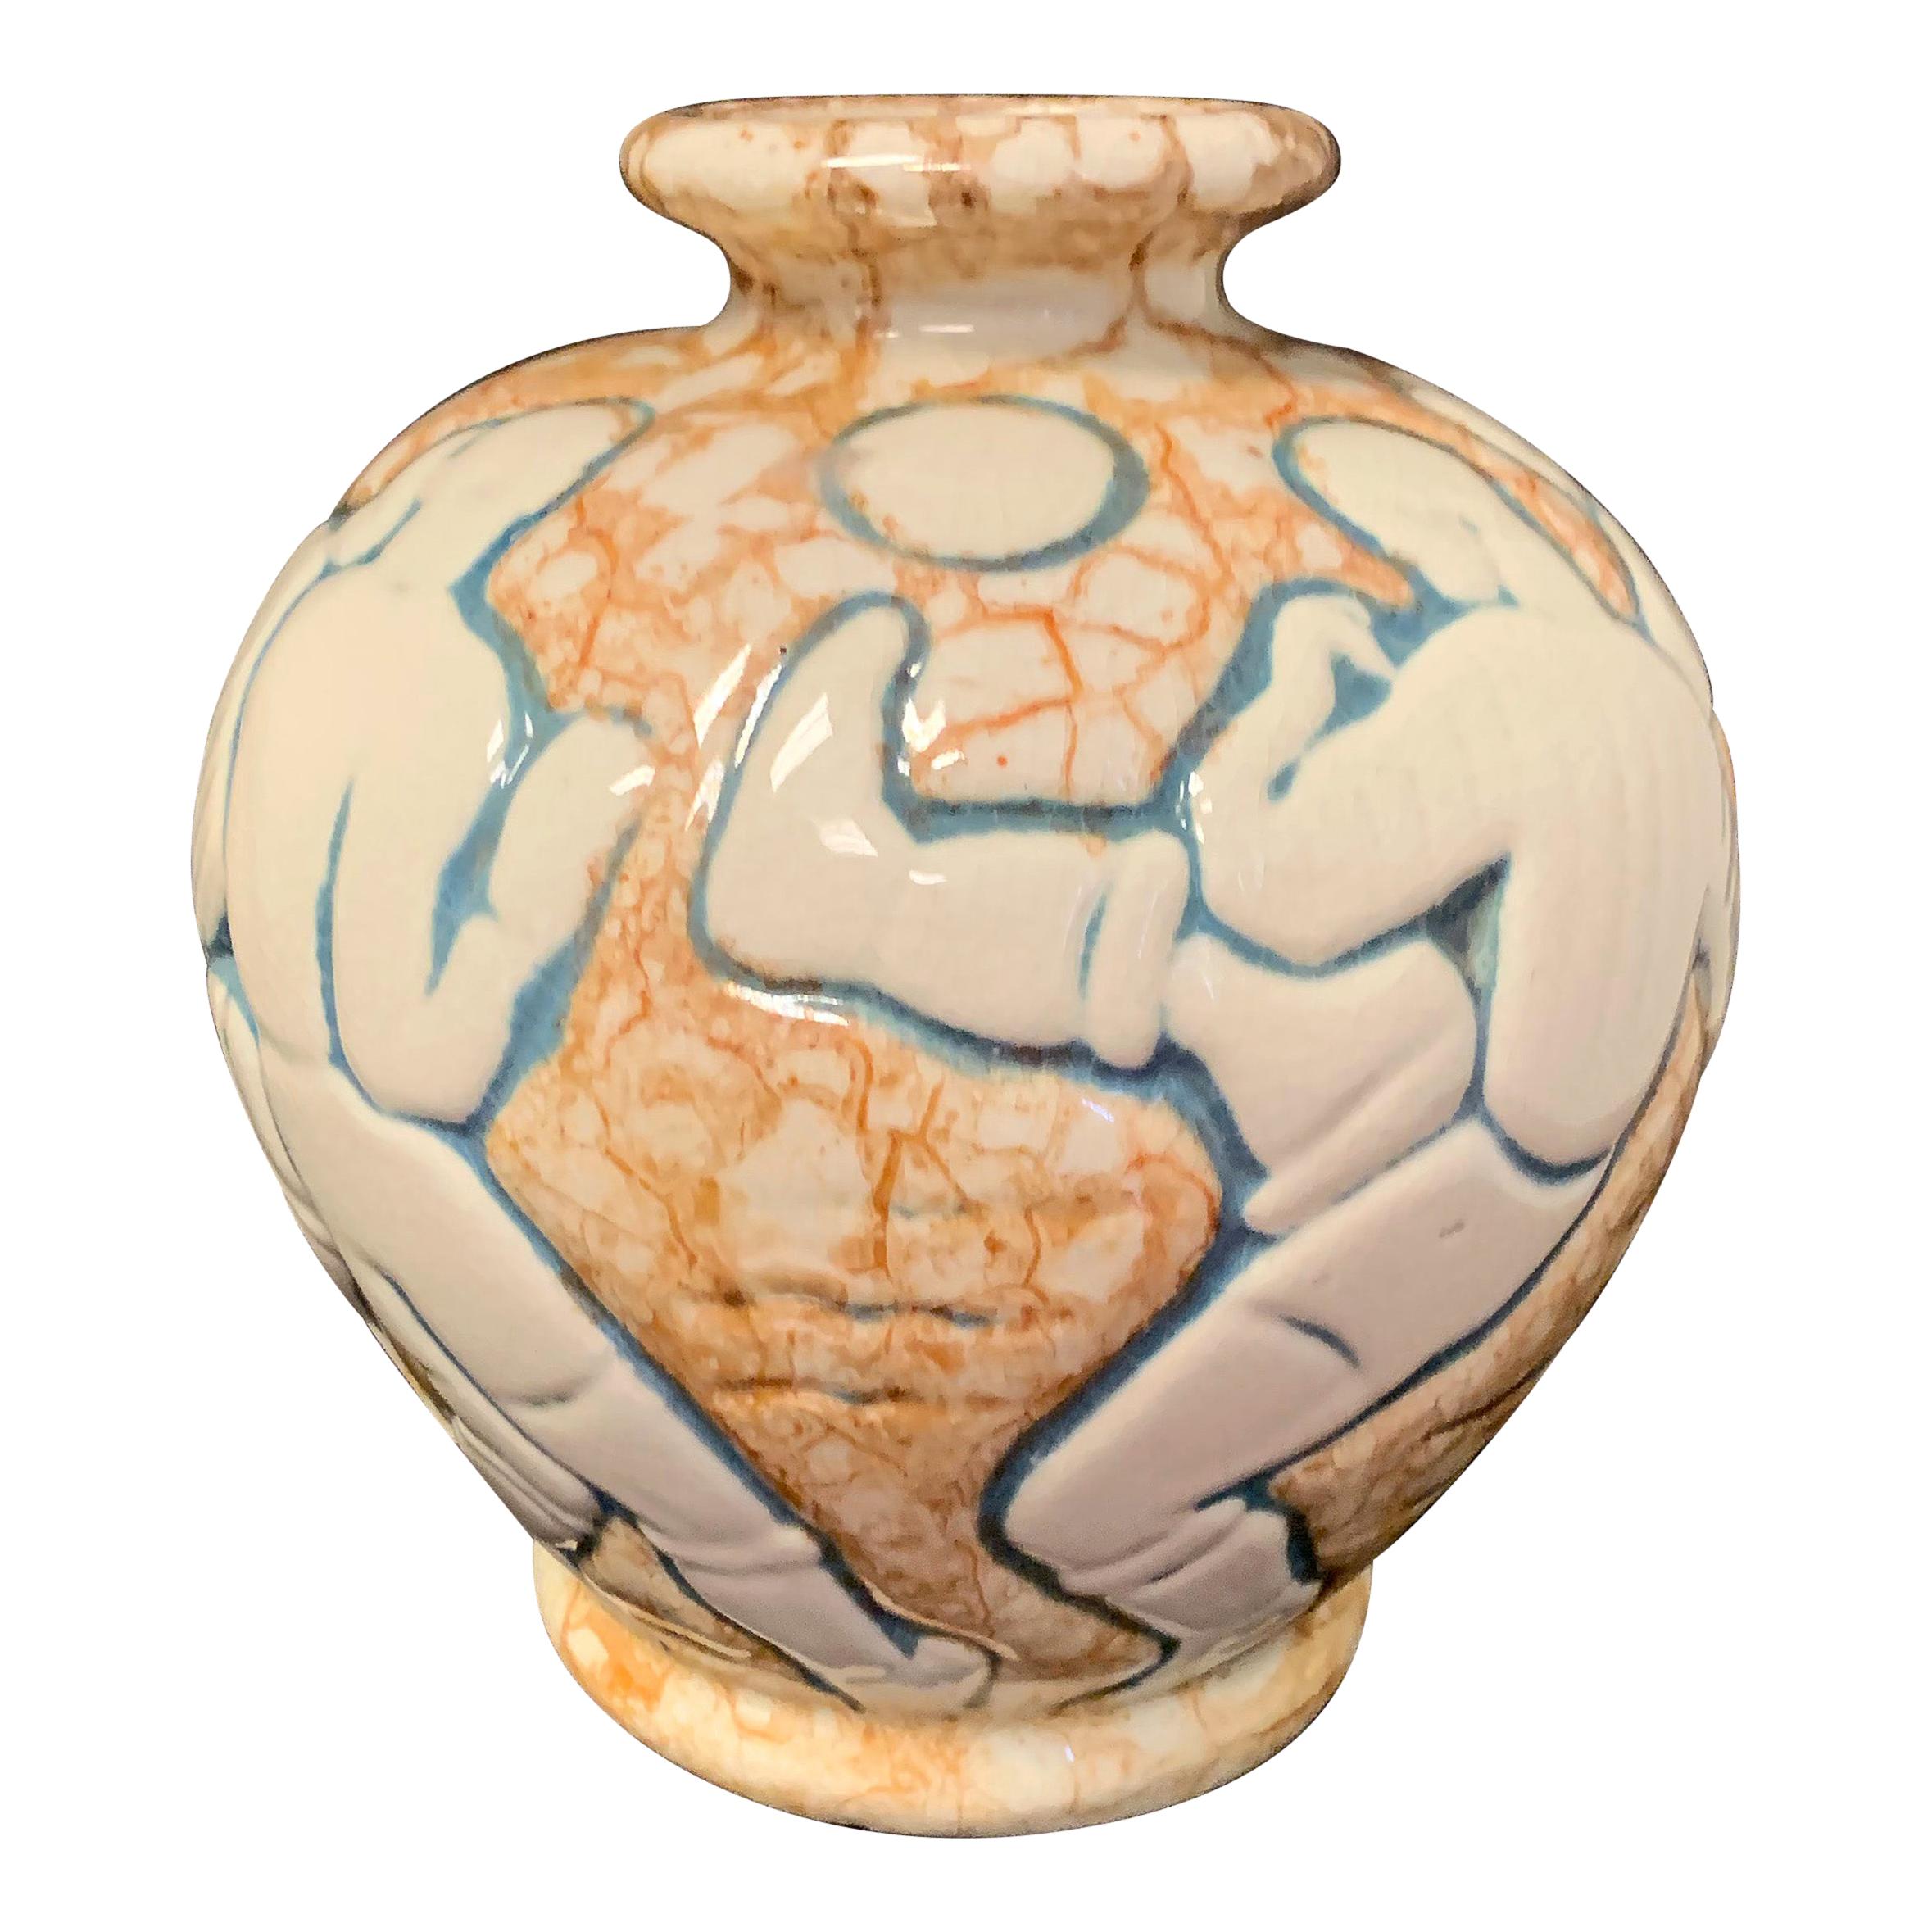 "Football 'Soccer', " Rare Art Deco Vase by André Legrand for Mougin Pottery